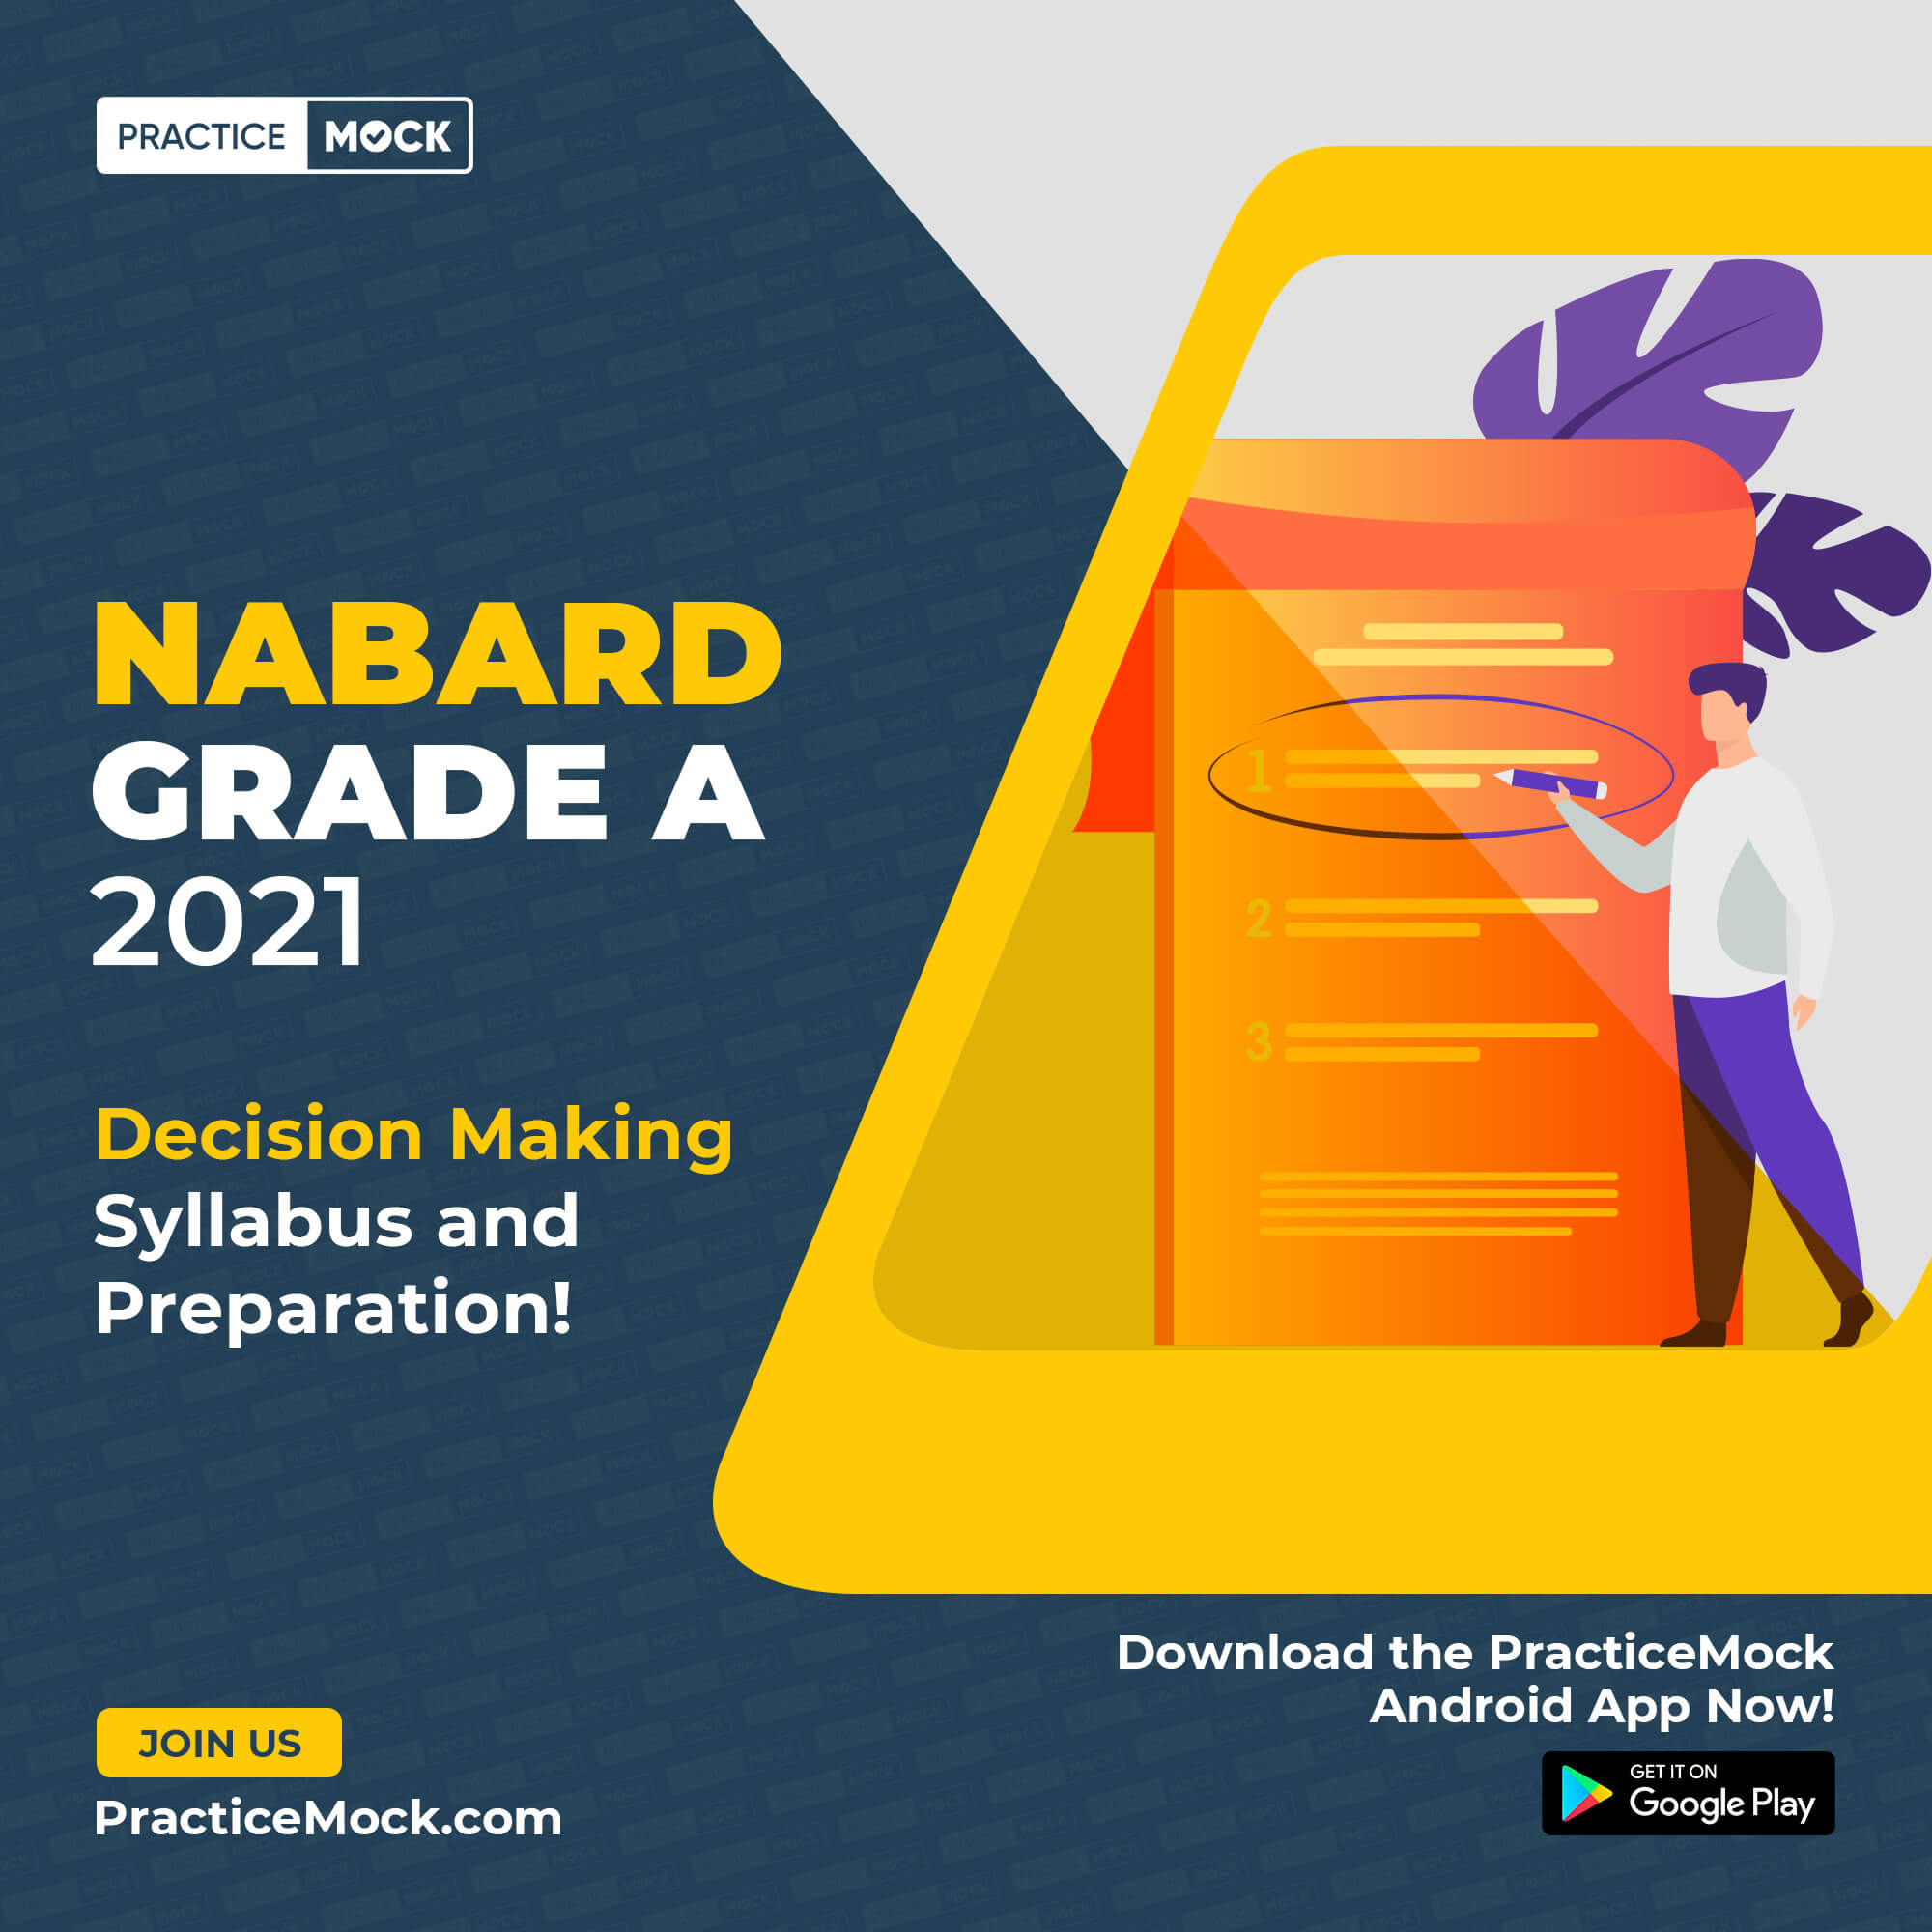 Score full 10 Marks in Decision Making NABARD Grade-A 2021